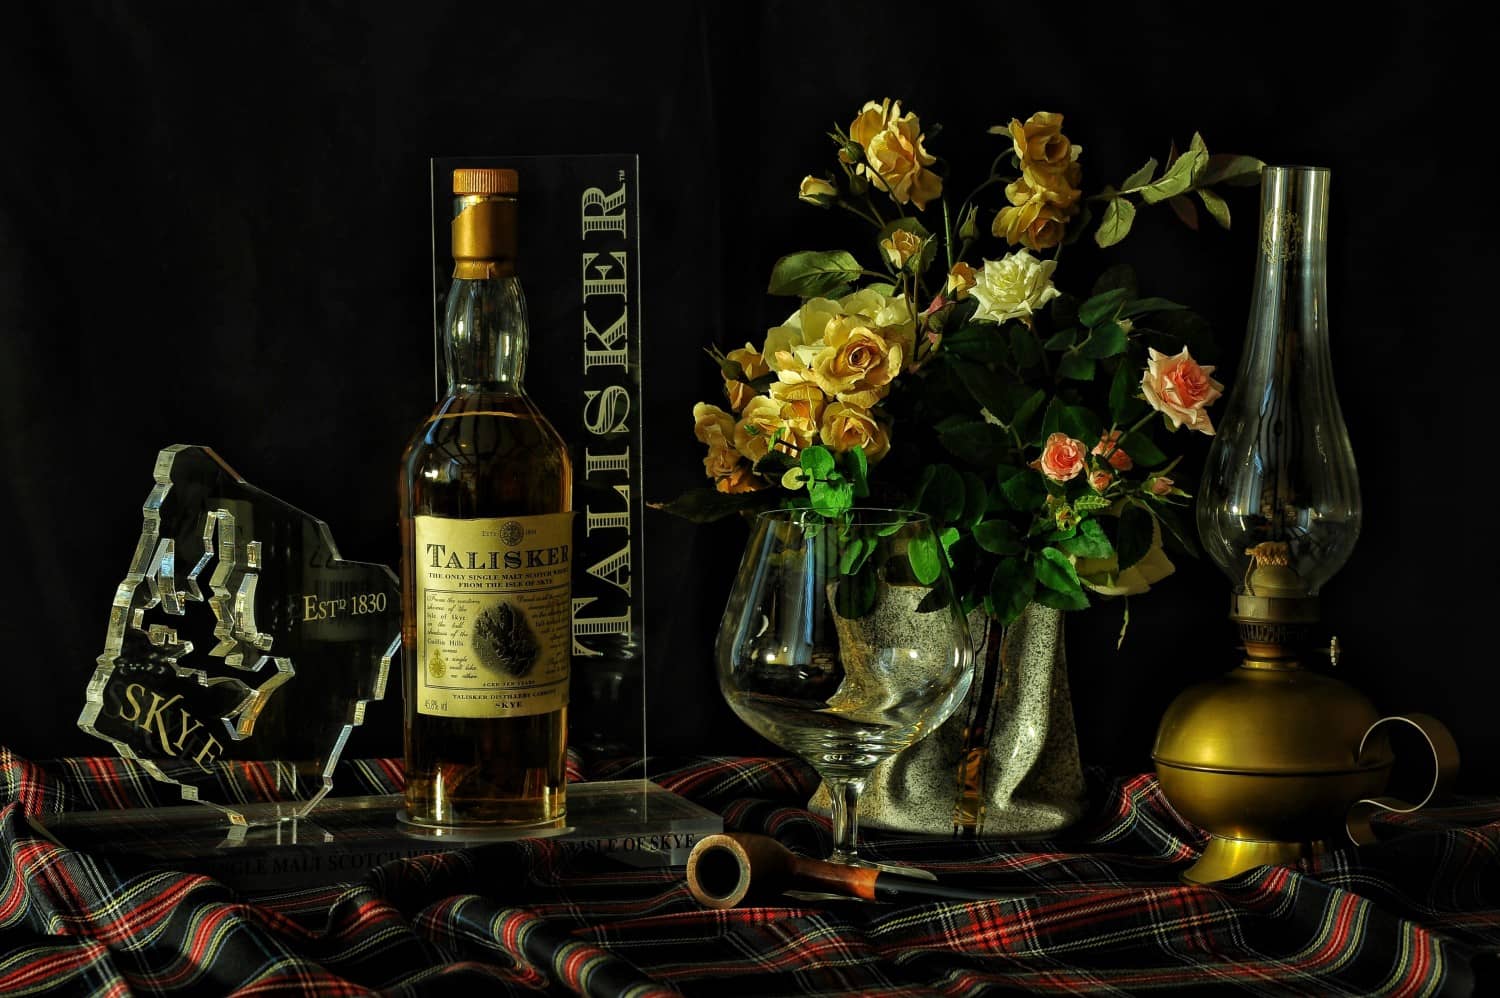 Bottle of Talisker Single Malt, one of the different types of scotch whisky